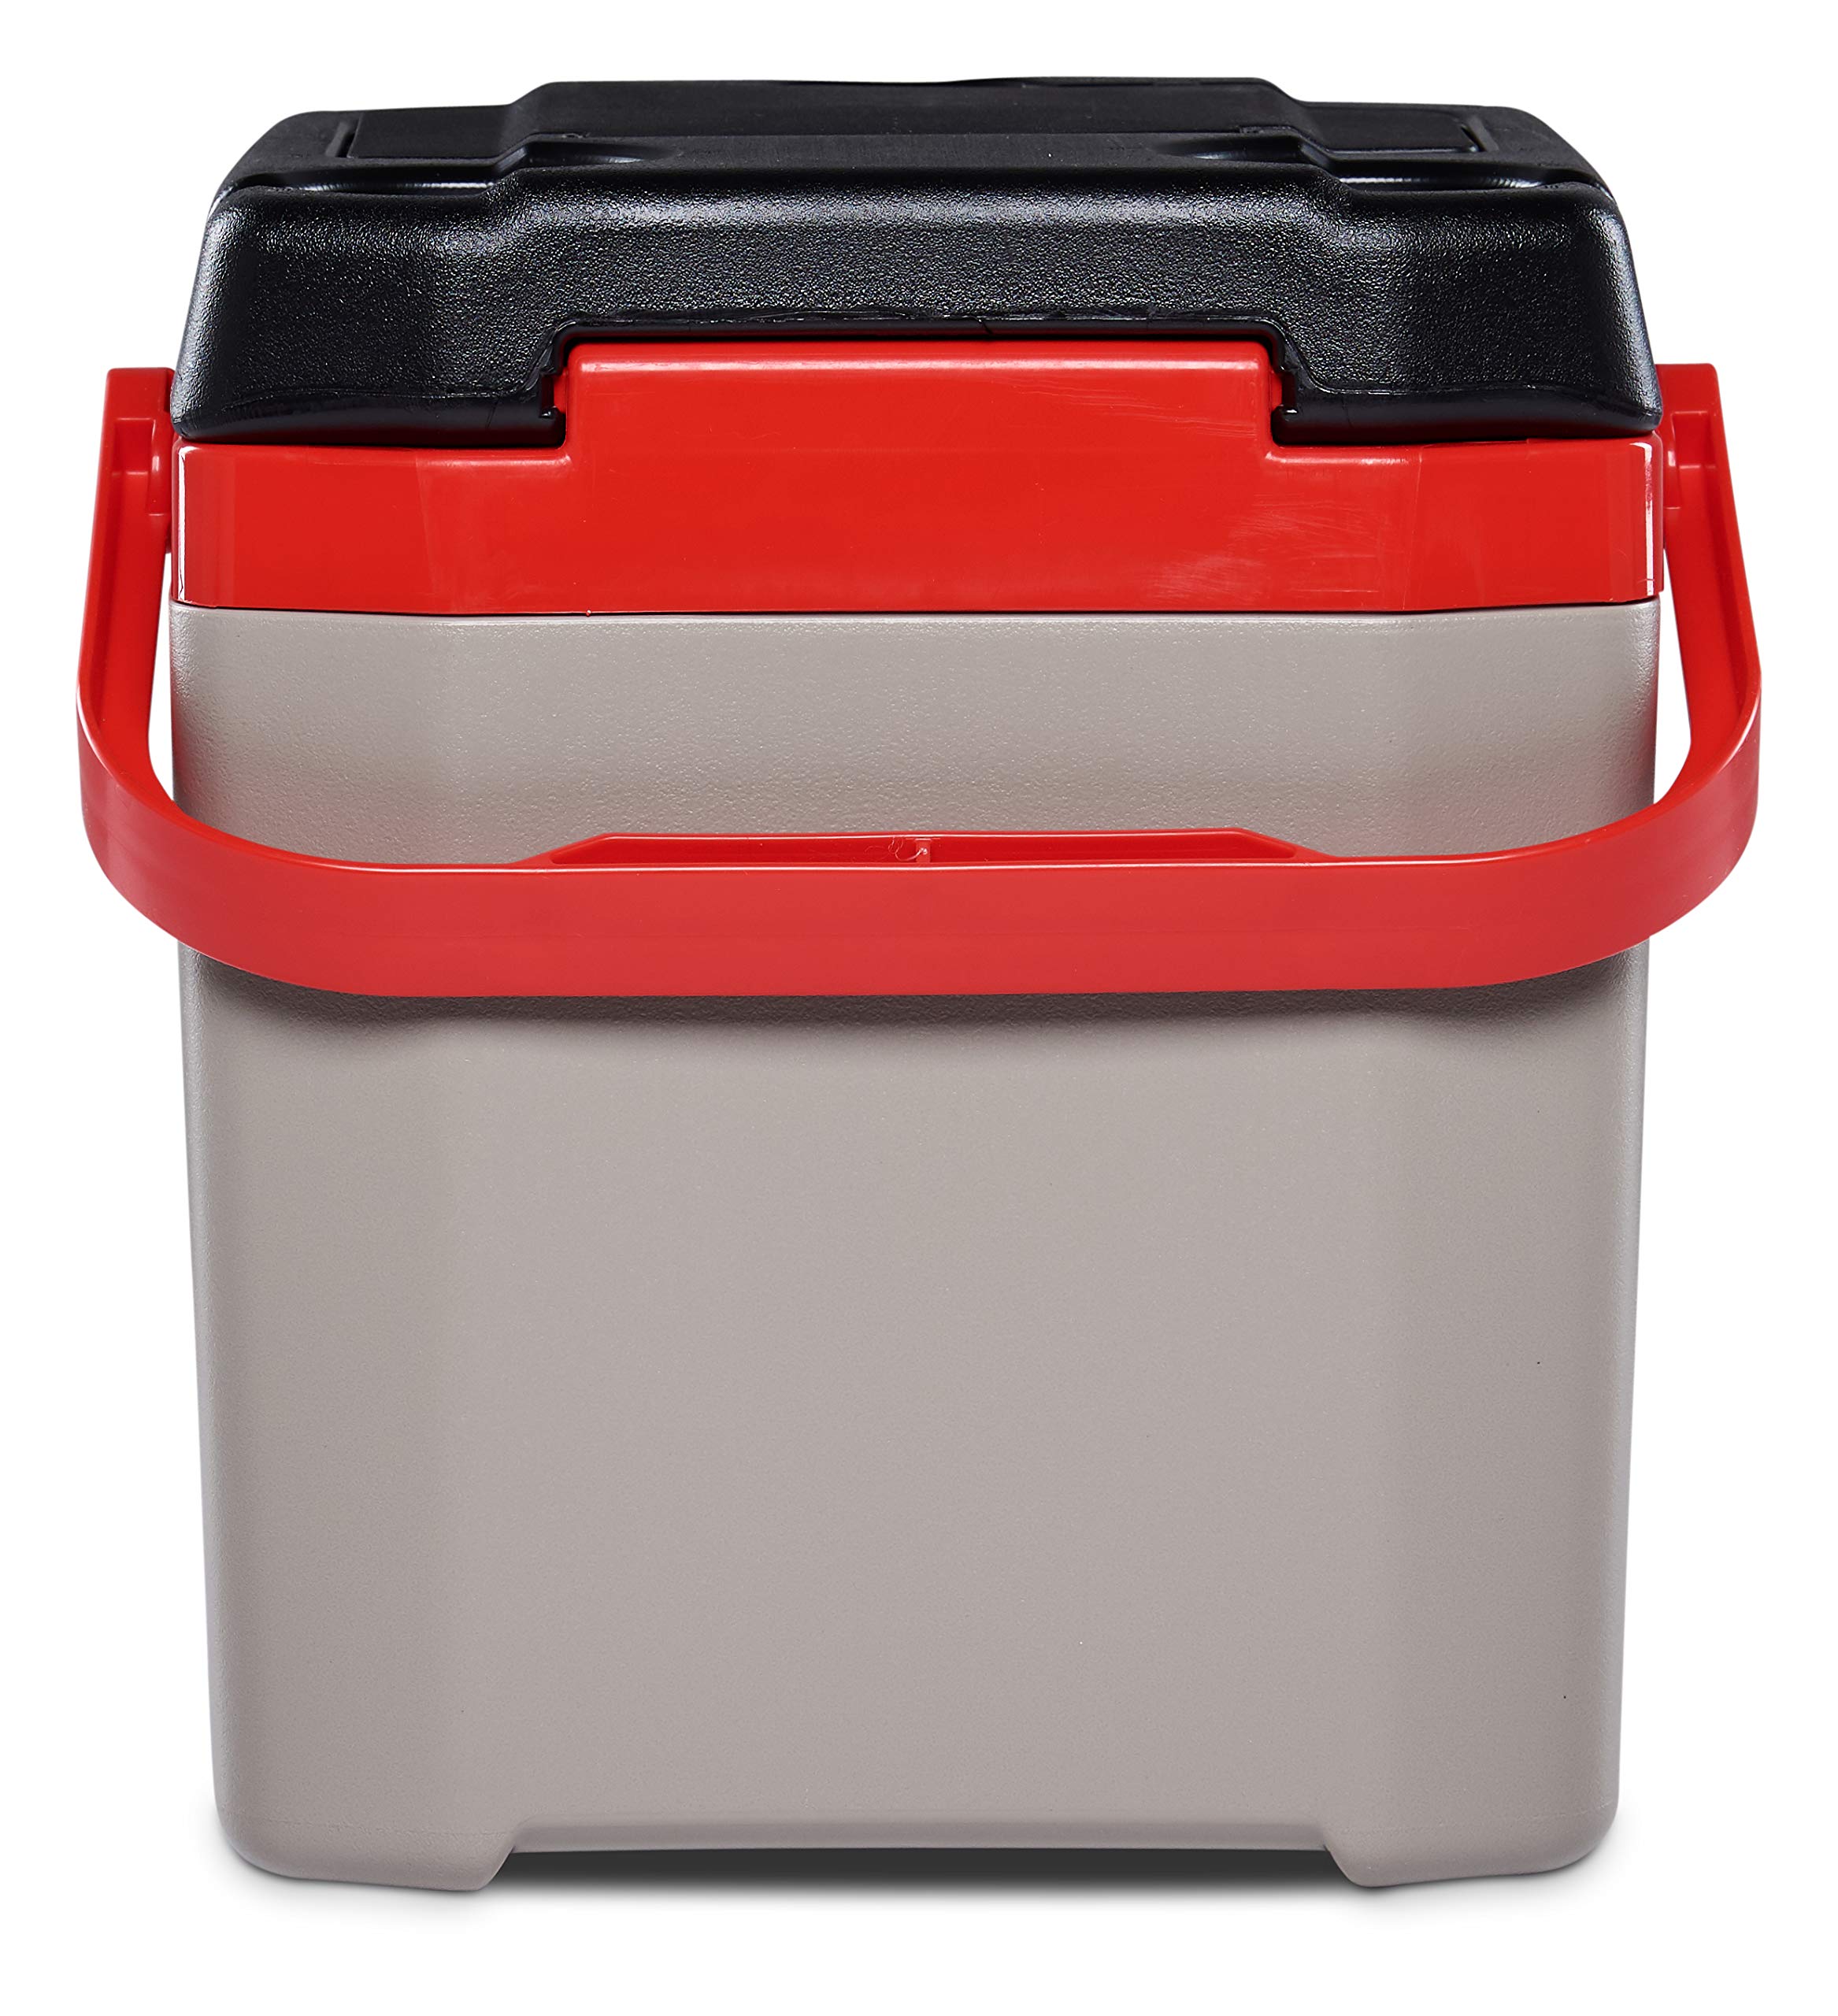 Igloo 12-16 Qt Profile Hardsided Insulated Lunch Cooler